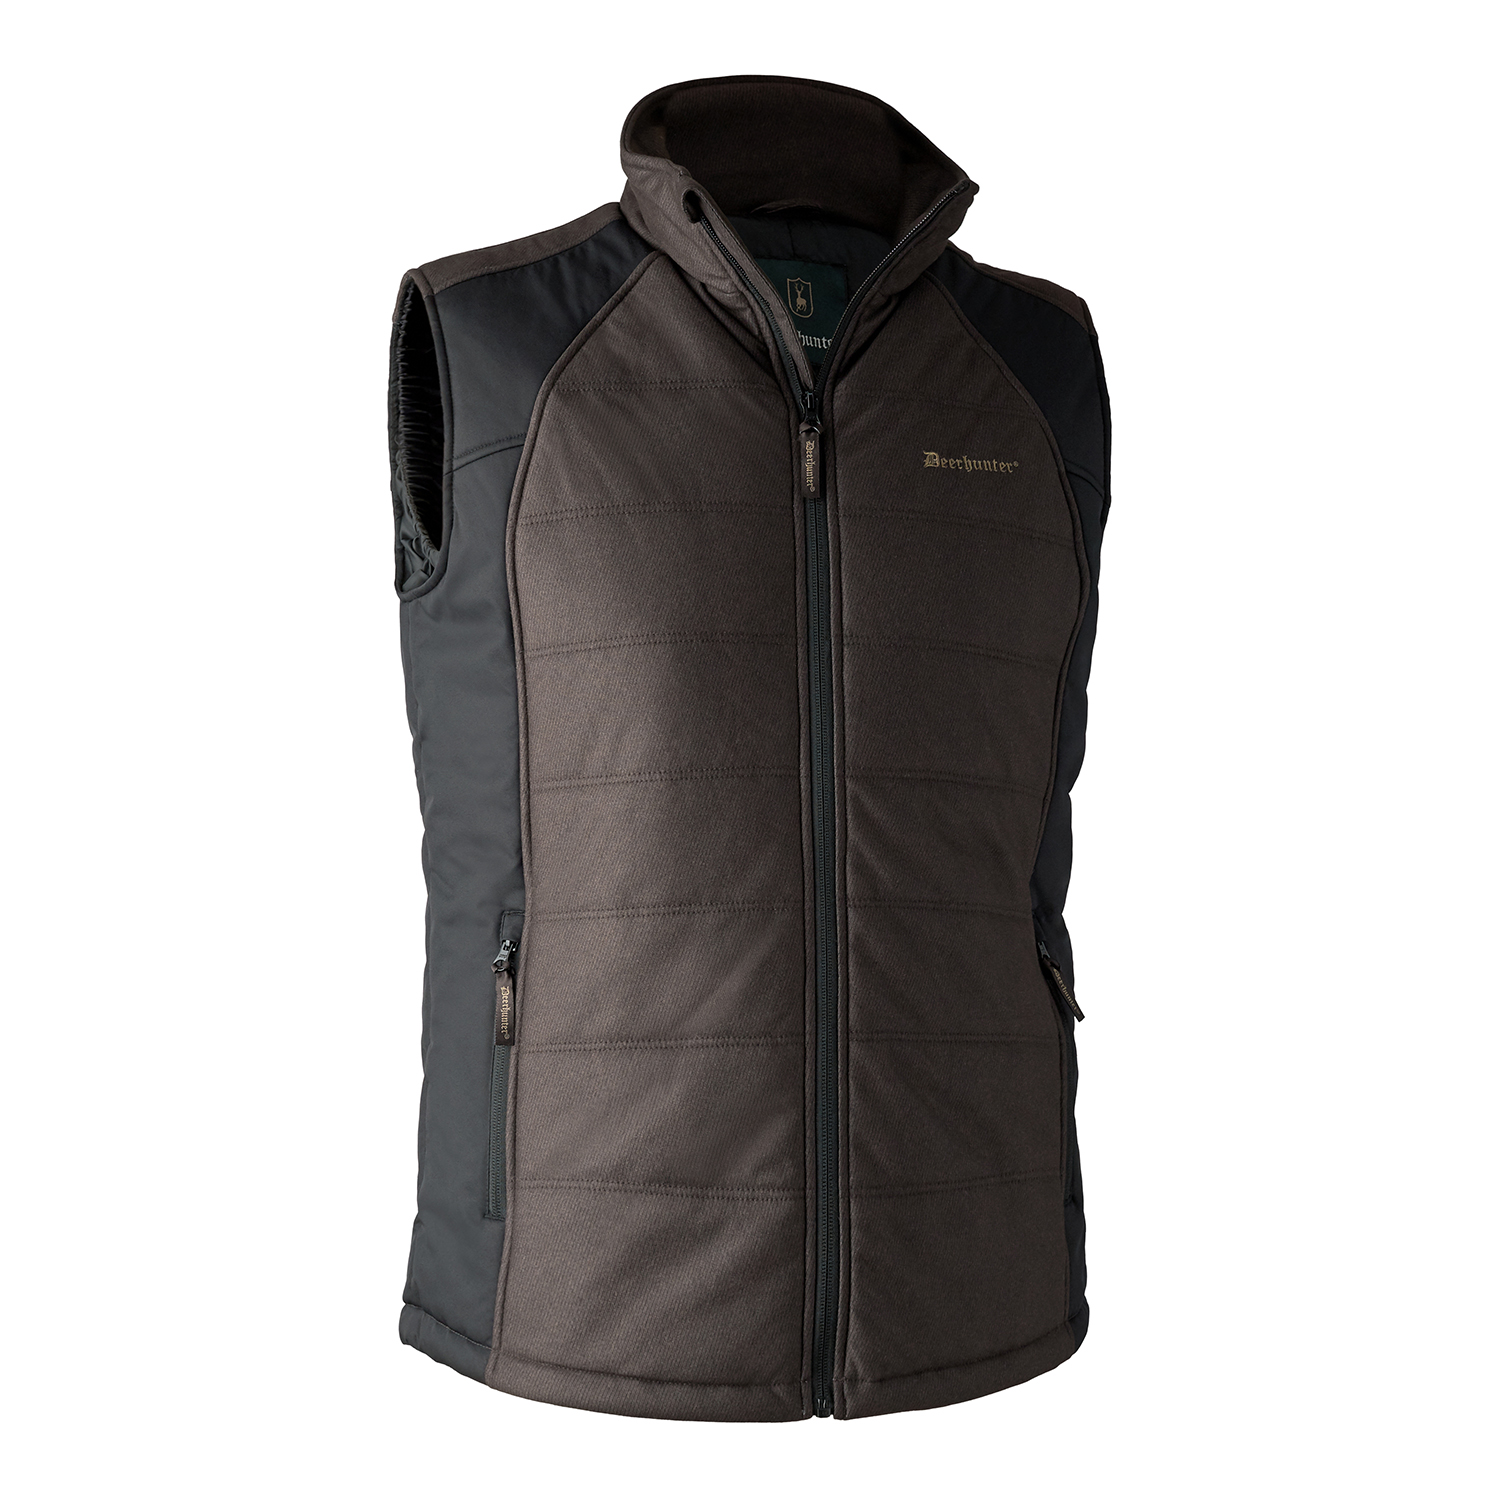 Moss Padded Vest - Brown Leaf - 3XL thumbnail